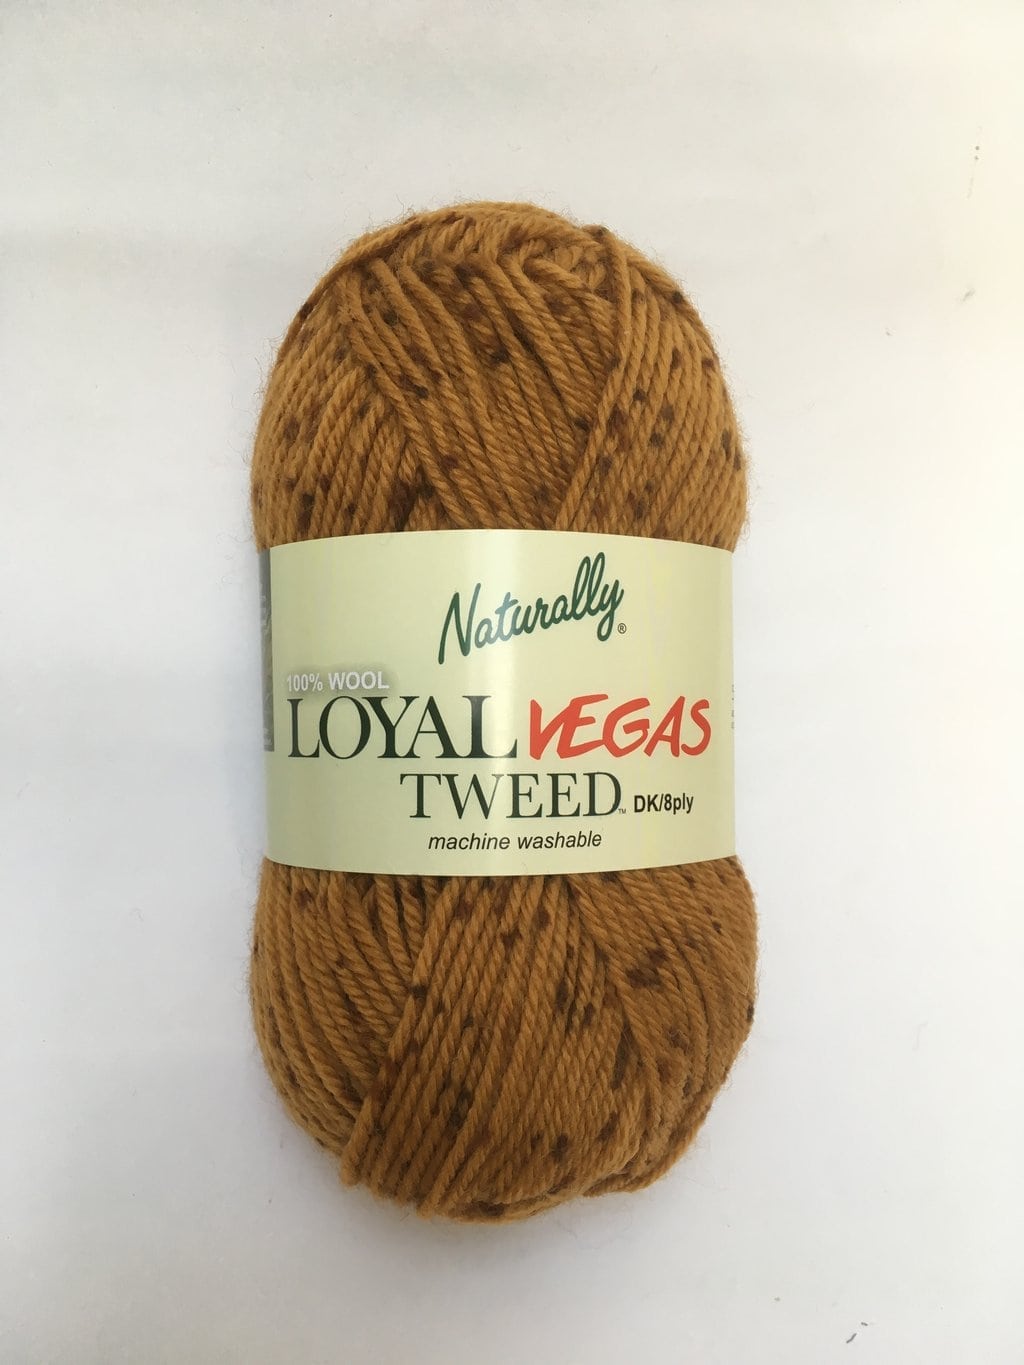 Naturally Loyal Vegas Tweed 100% wool 8ply yarn double knit cover